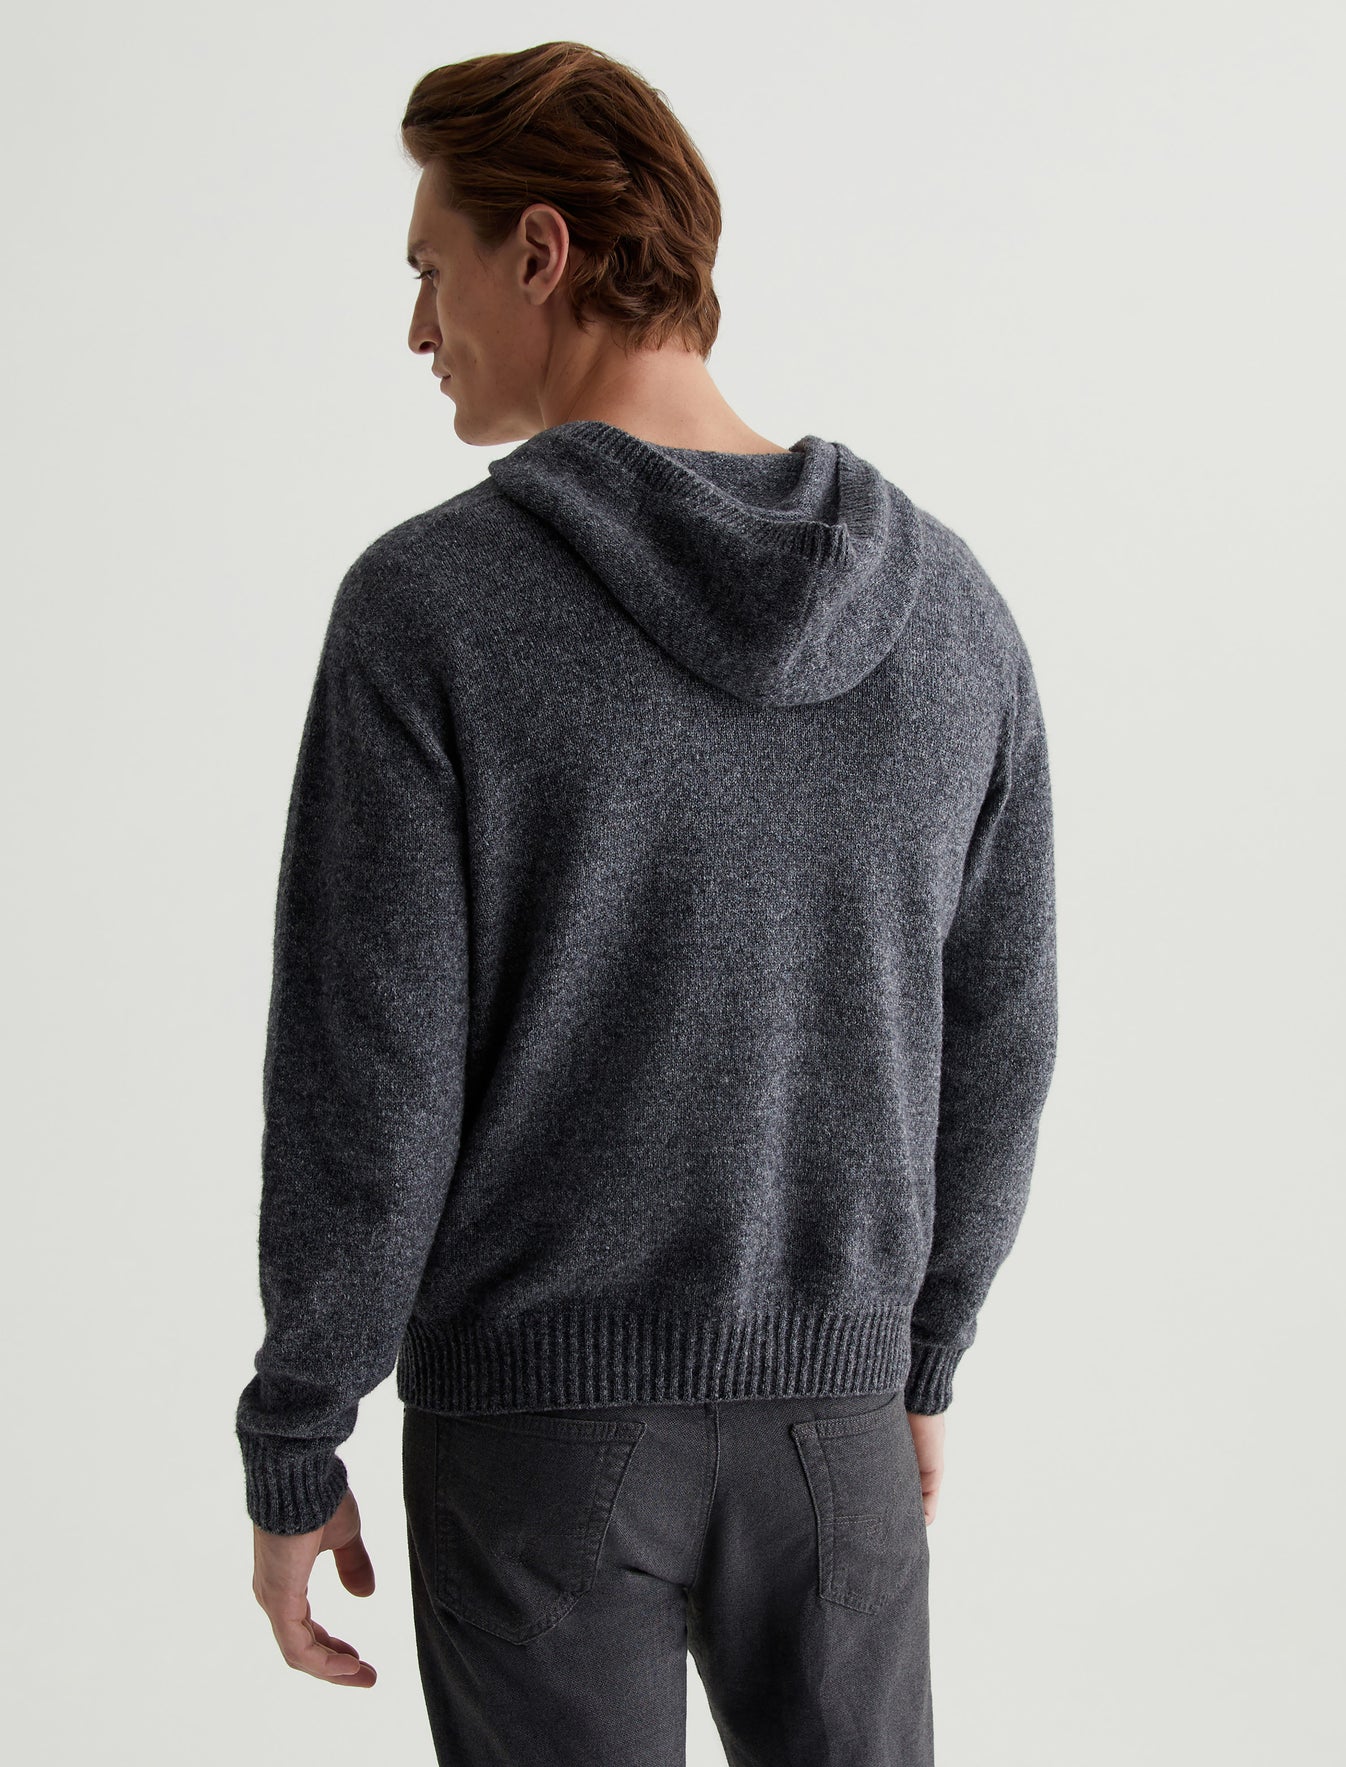 Cason Hoodie Heather Charcoal Classic Hooded Sweater Photo 6